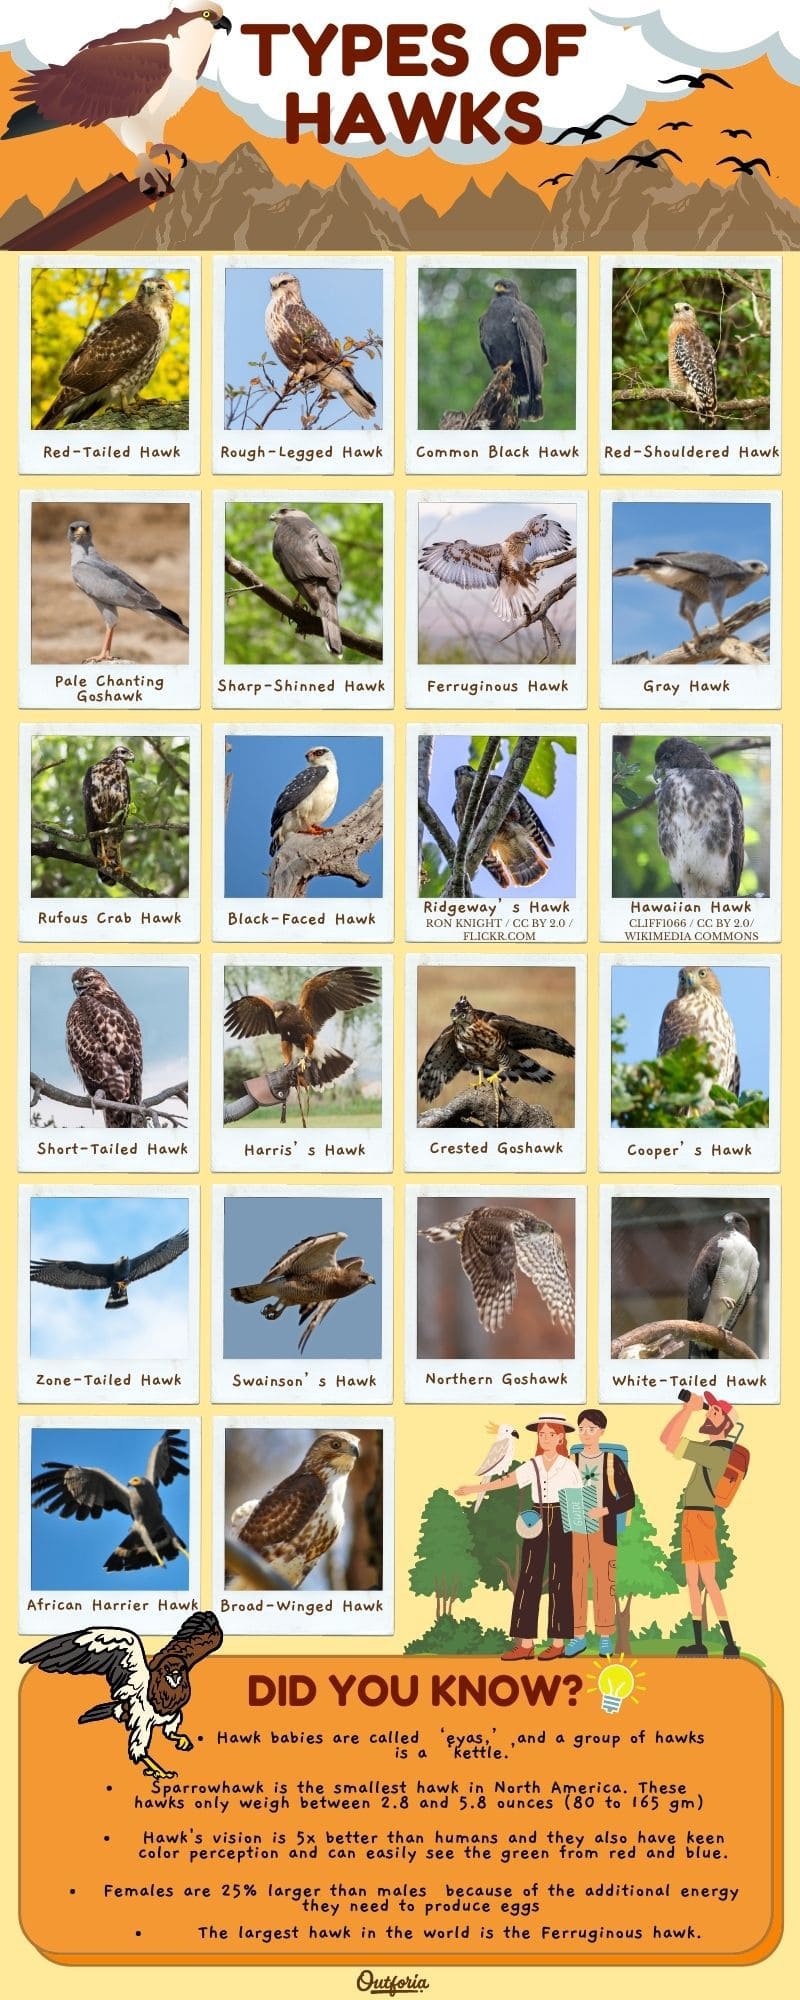 chart of the different types of hawks with names, image, and fun facts